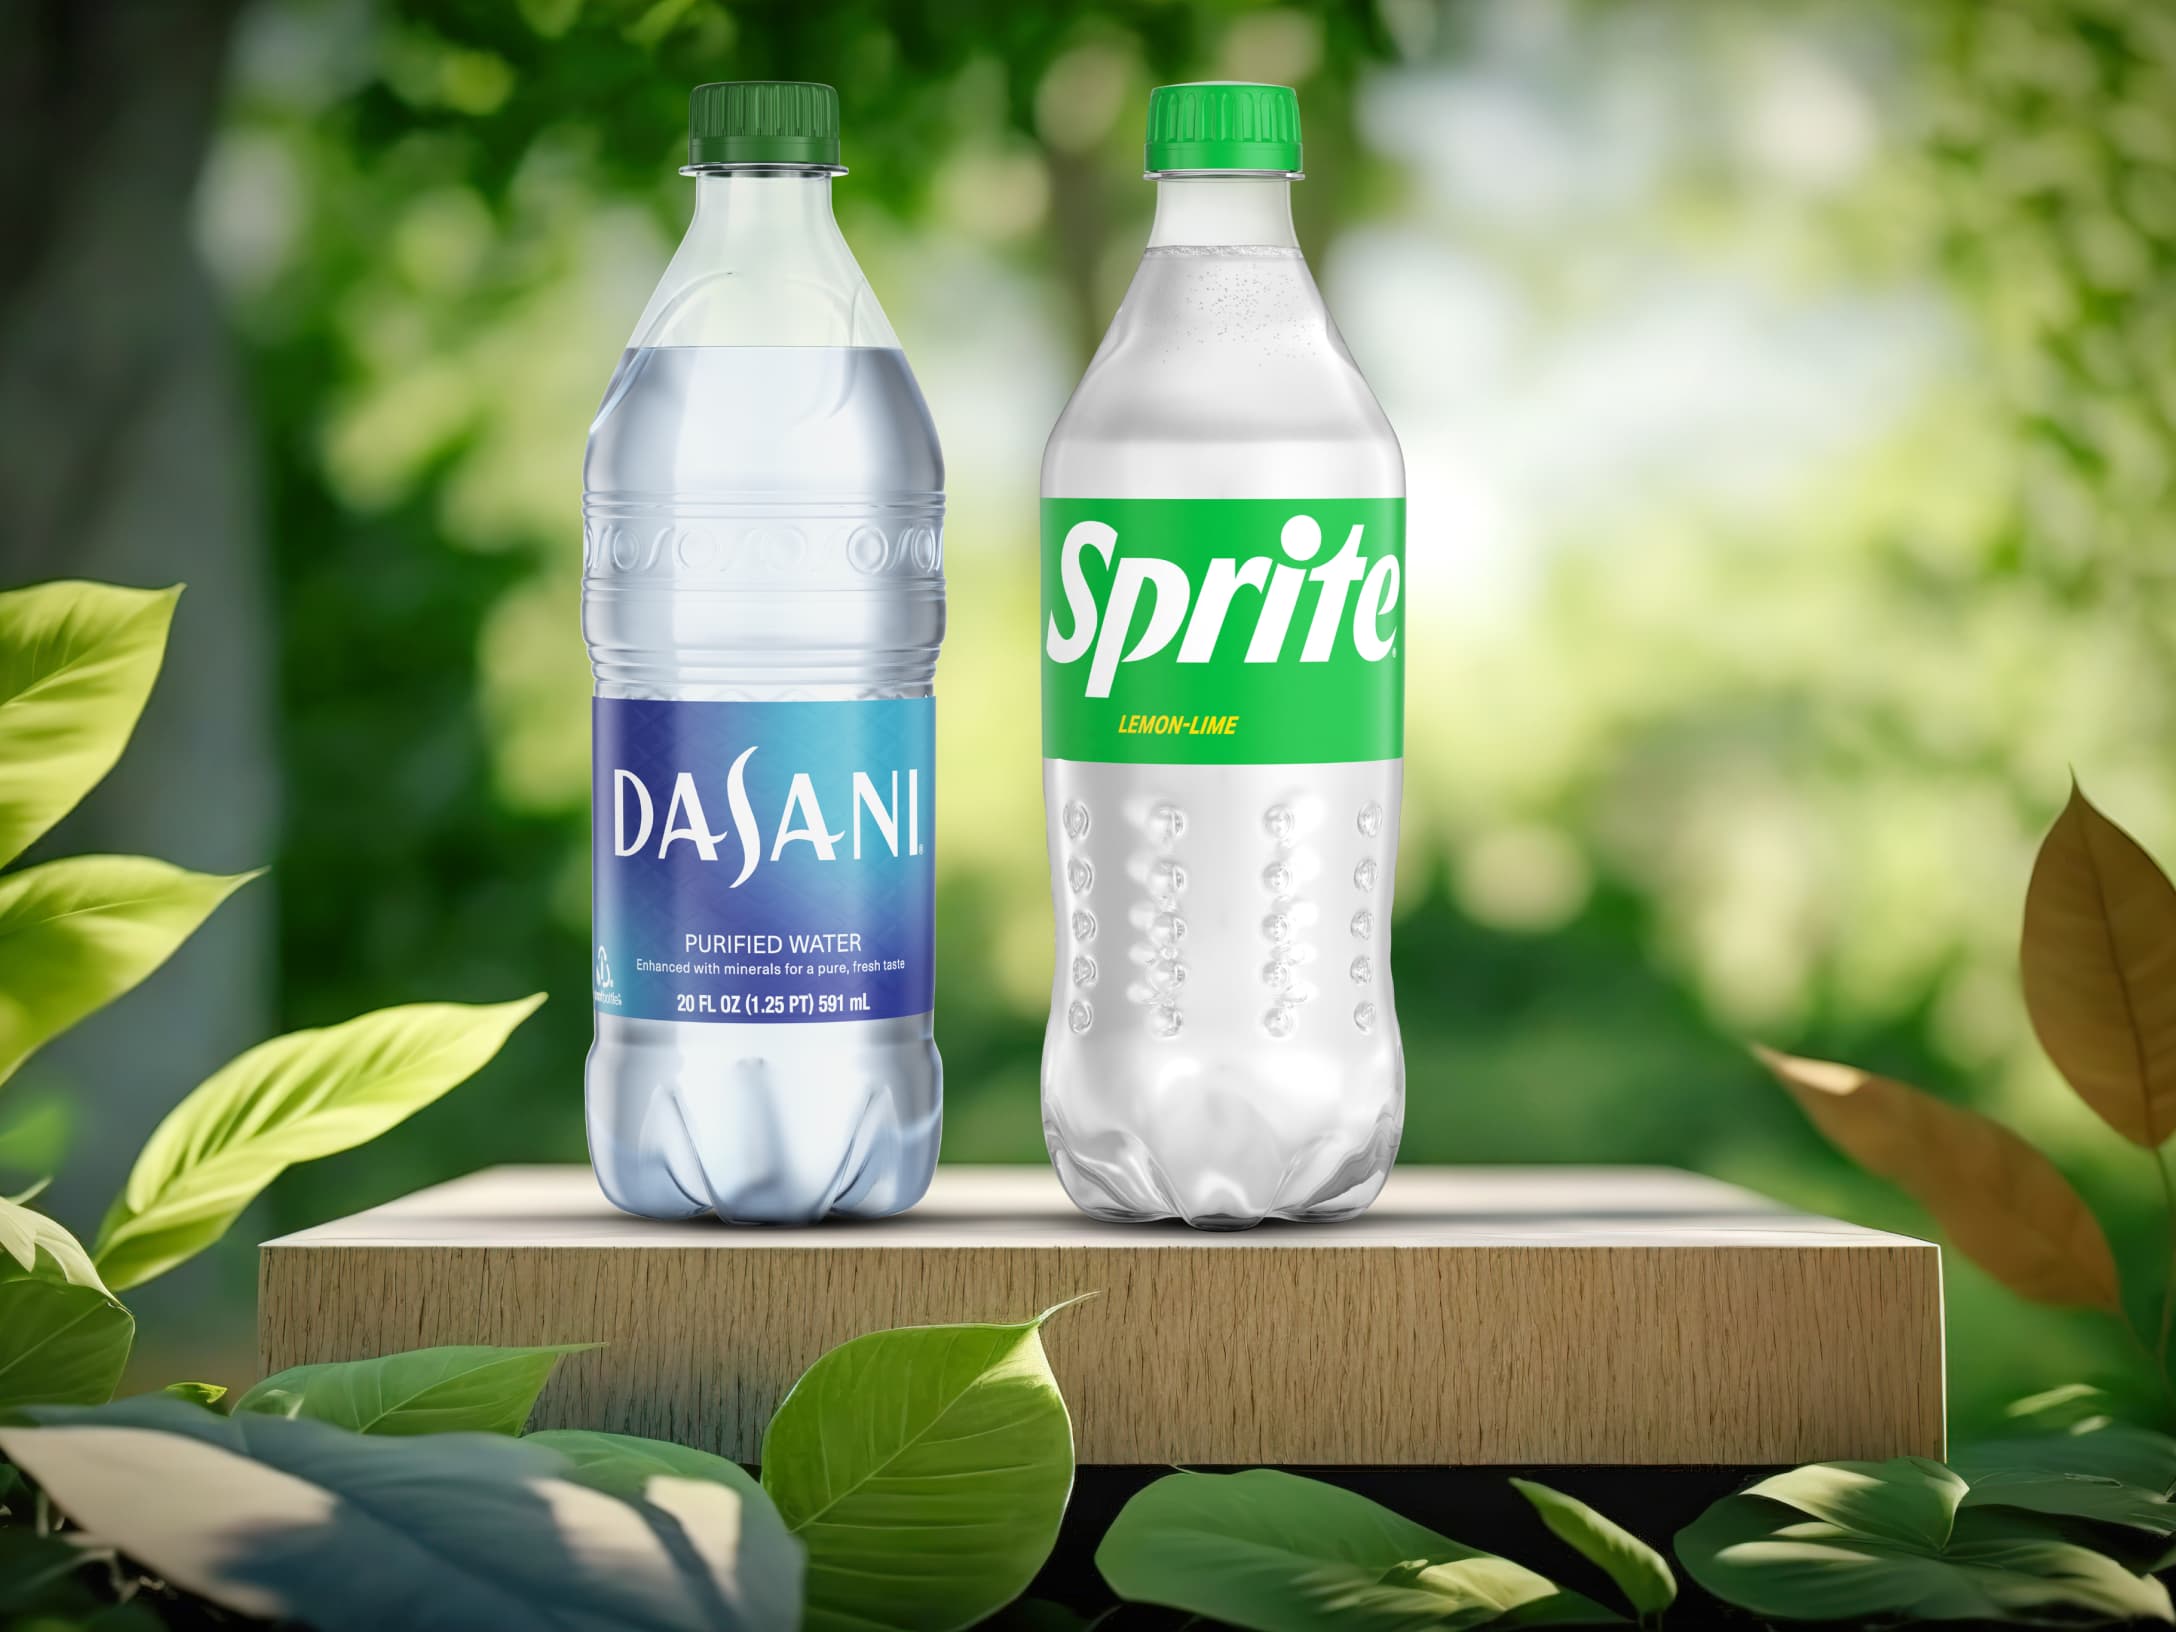 Dasani and Sprite Sustainability Packaging